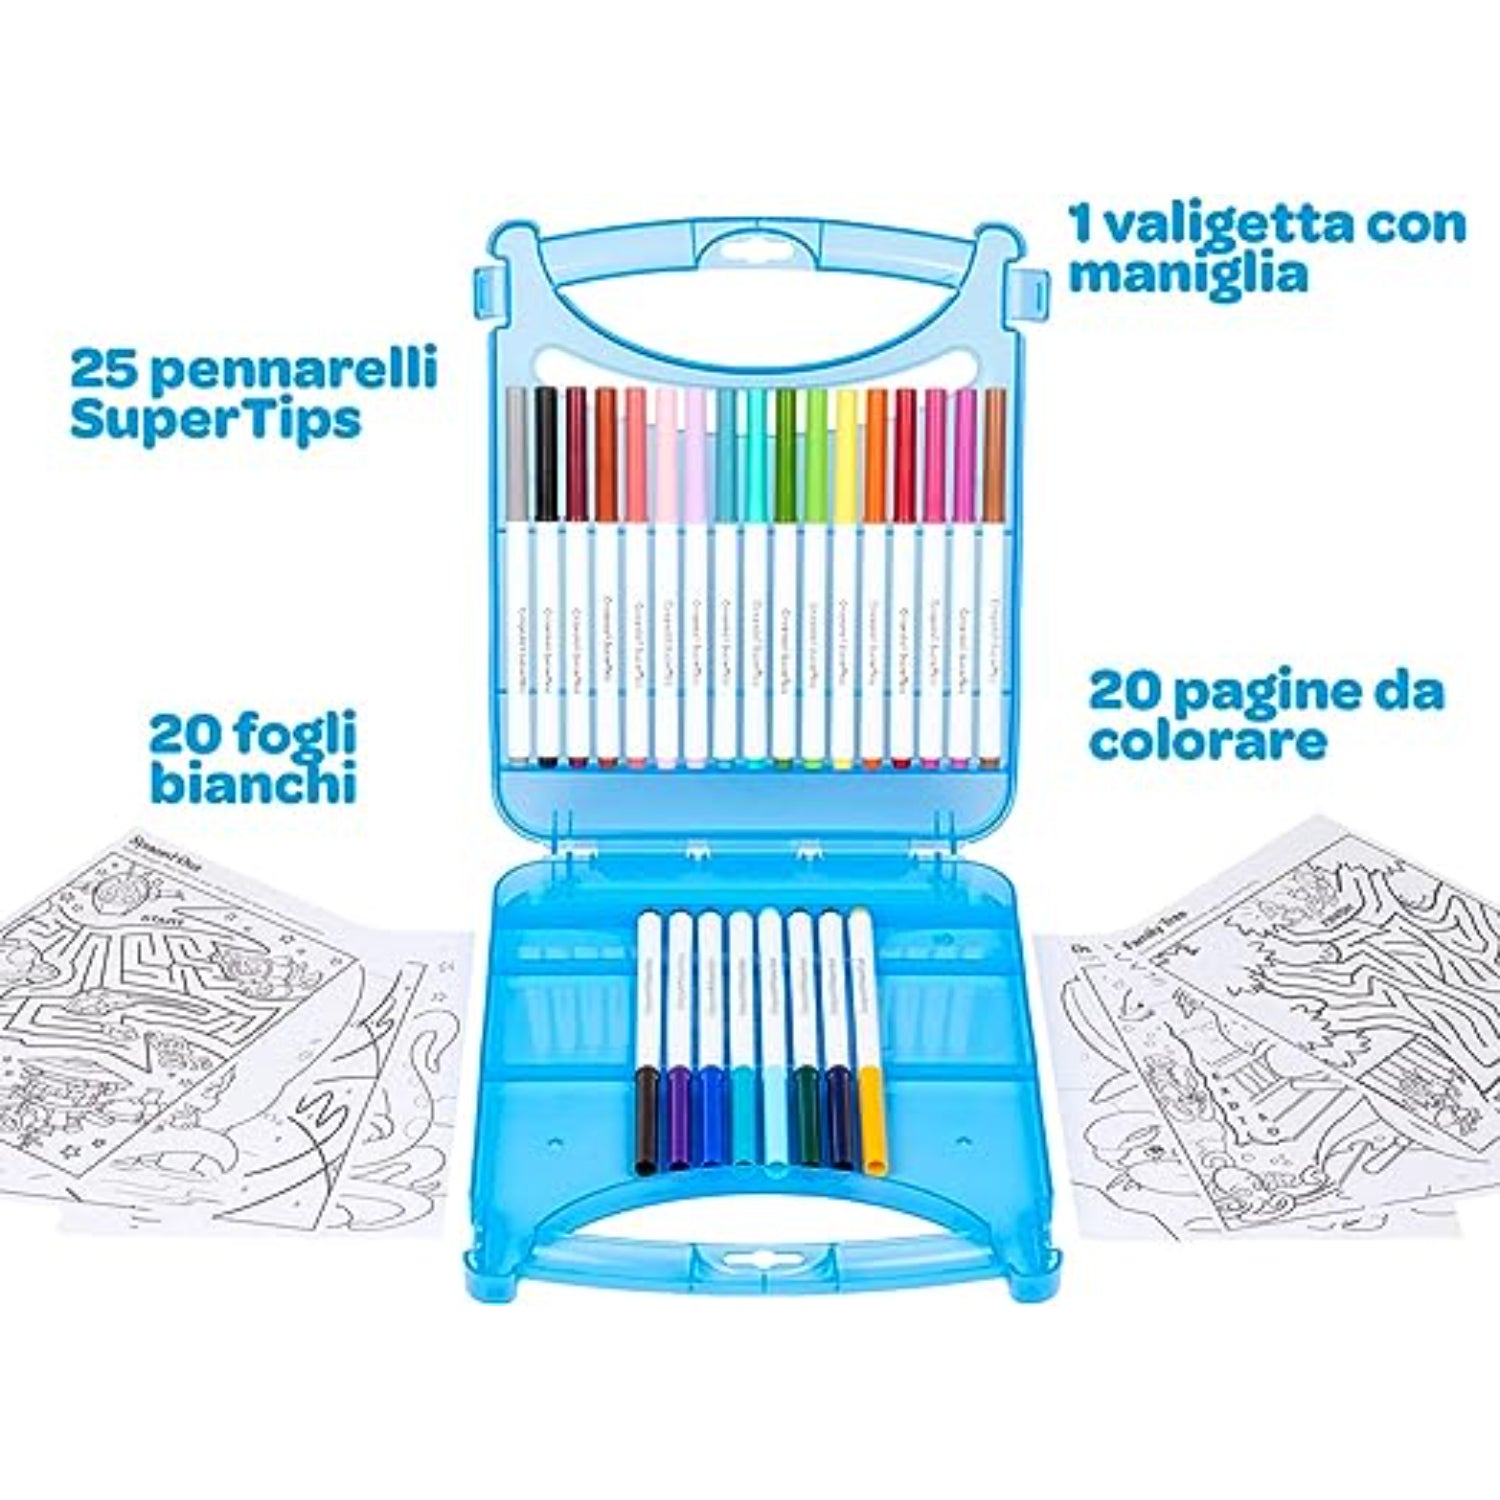 Crayola Create & Color Super Tips Kit SuperTips Washable Markers, Assorted